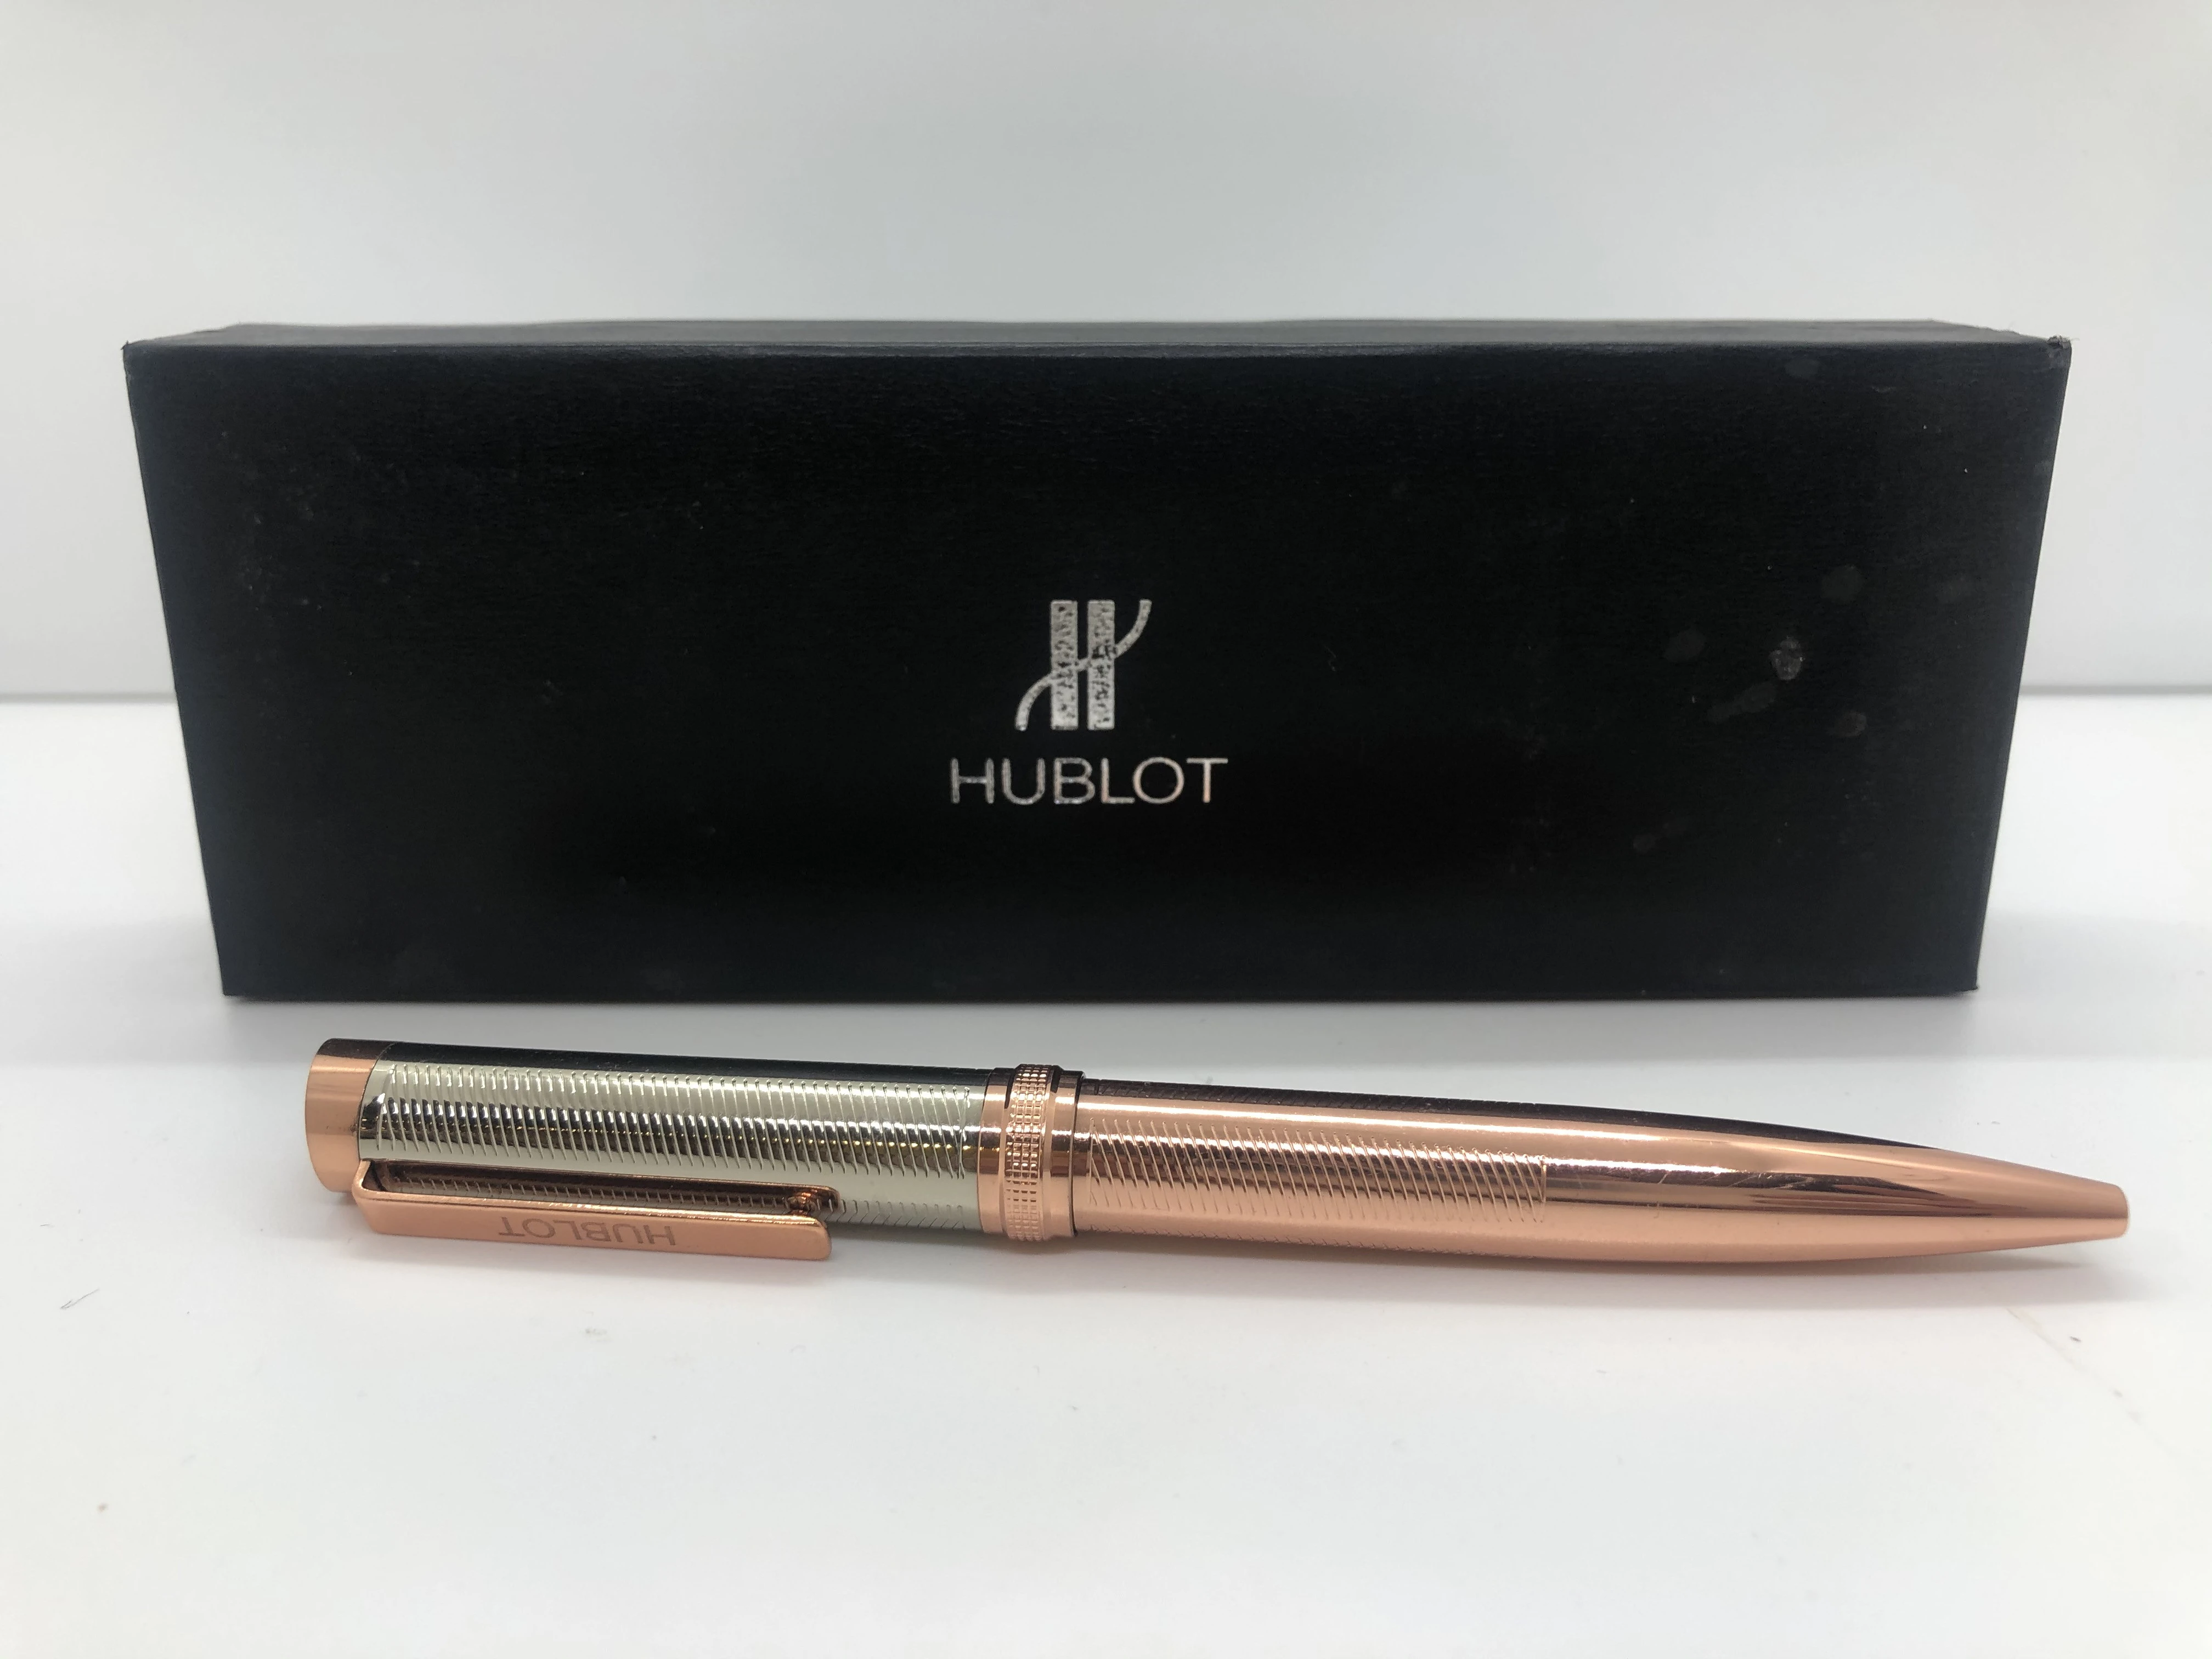 Pen of Hublot, rose gold * silver - with embossed touches - with the brand's logo on top and engraved in the clasp